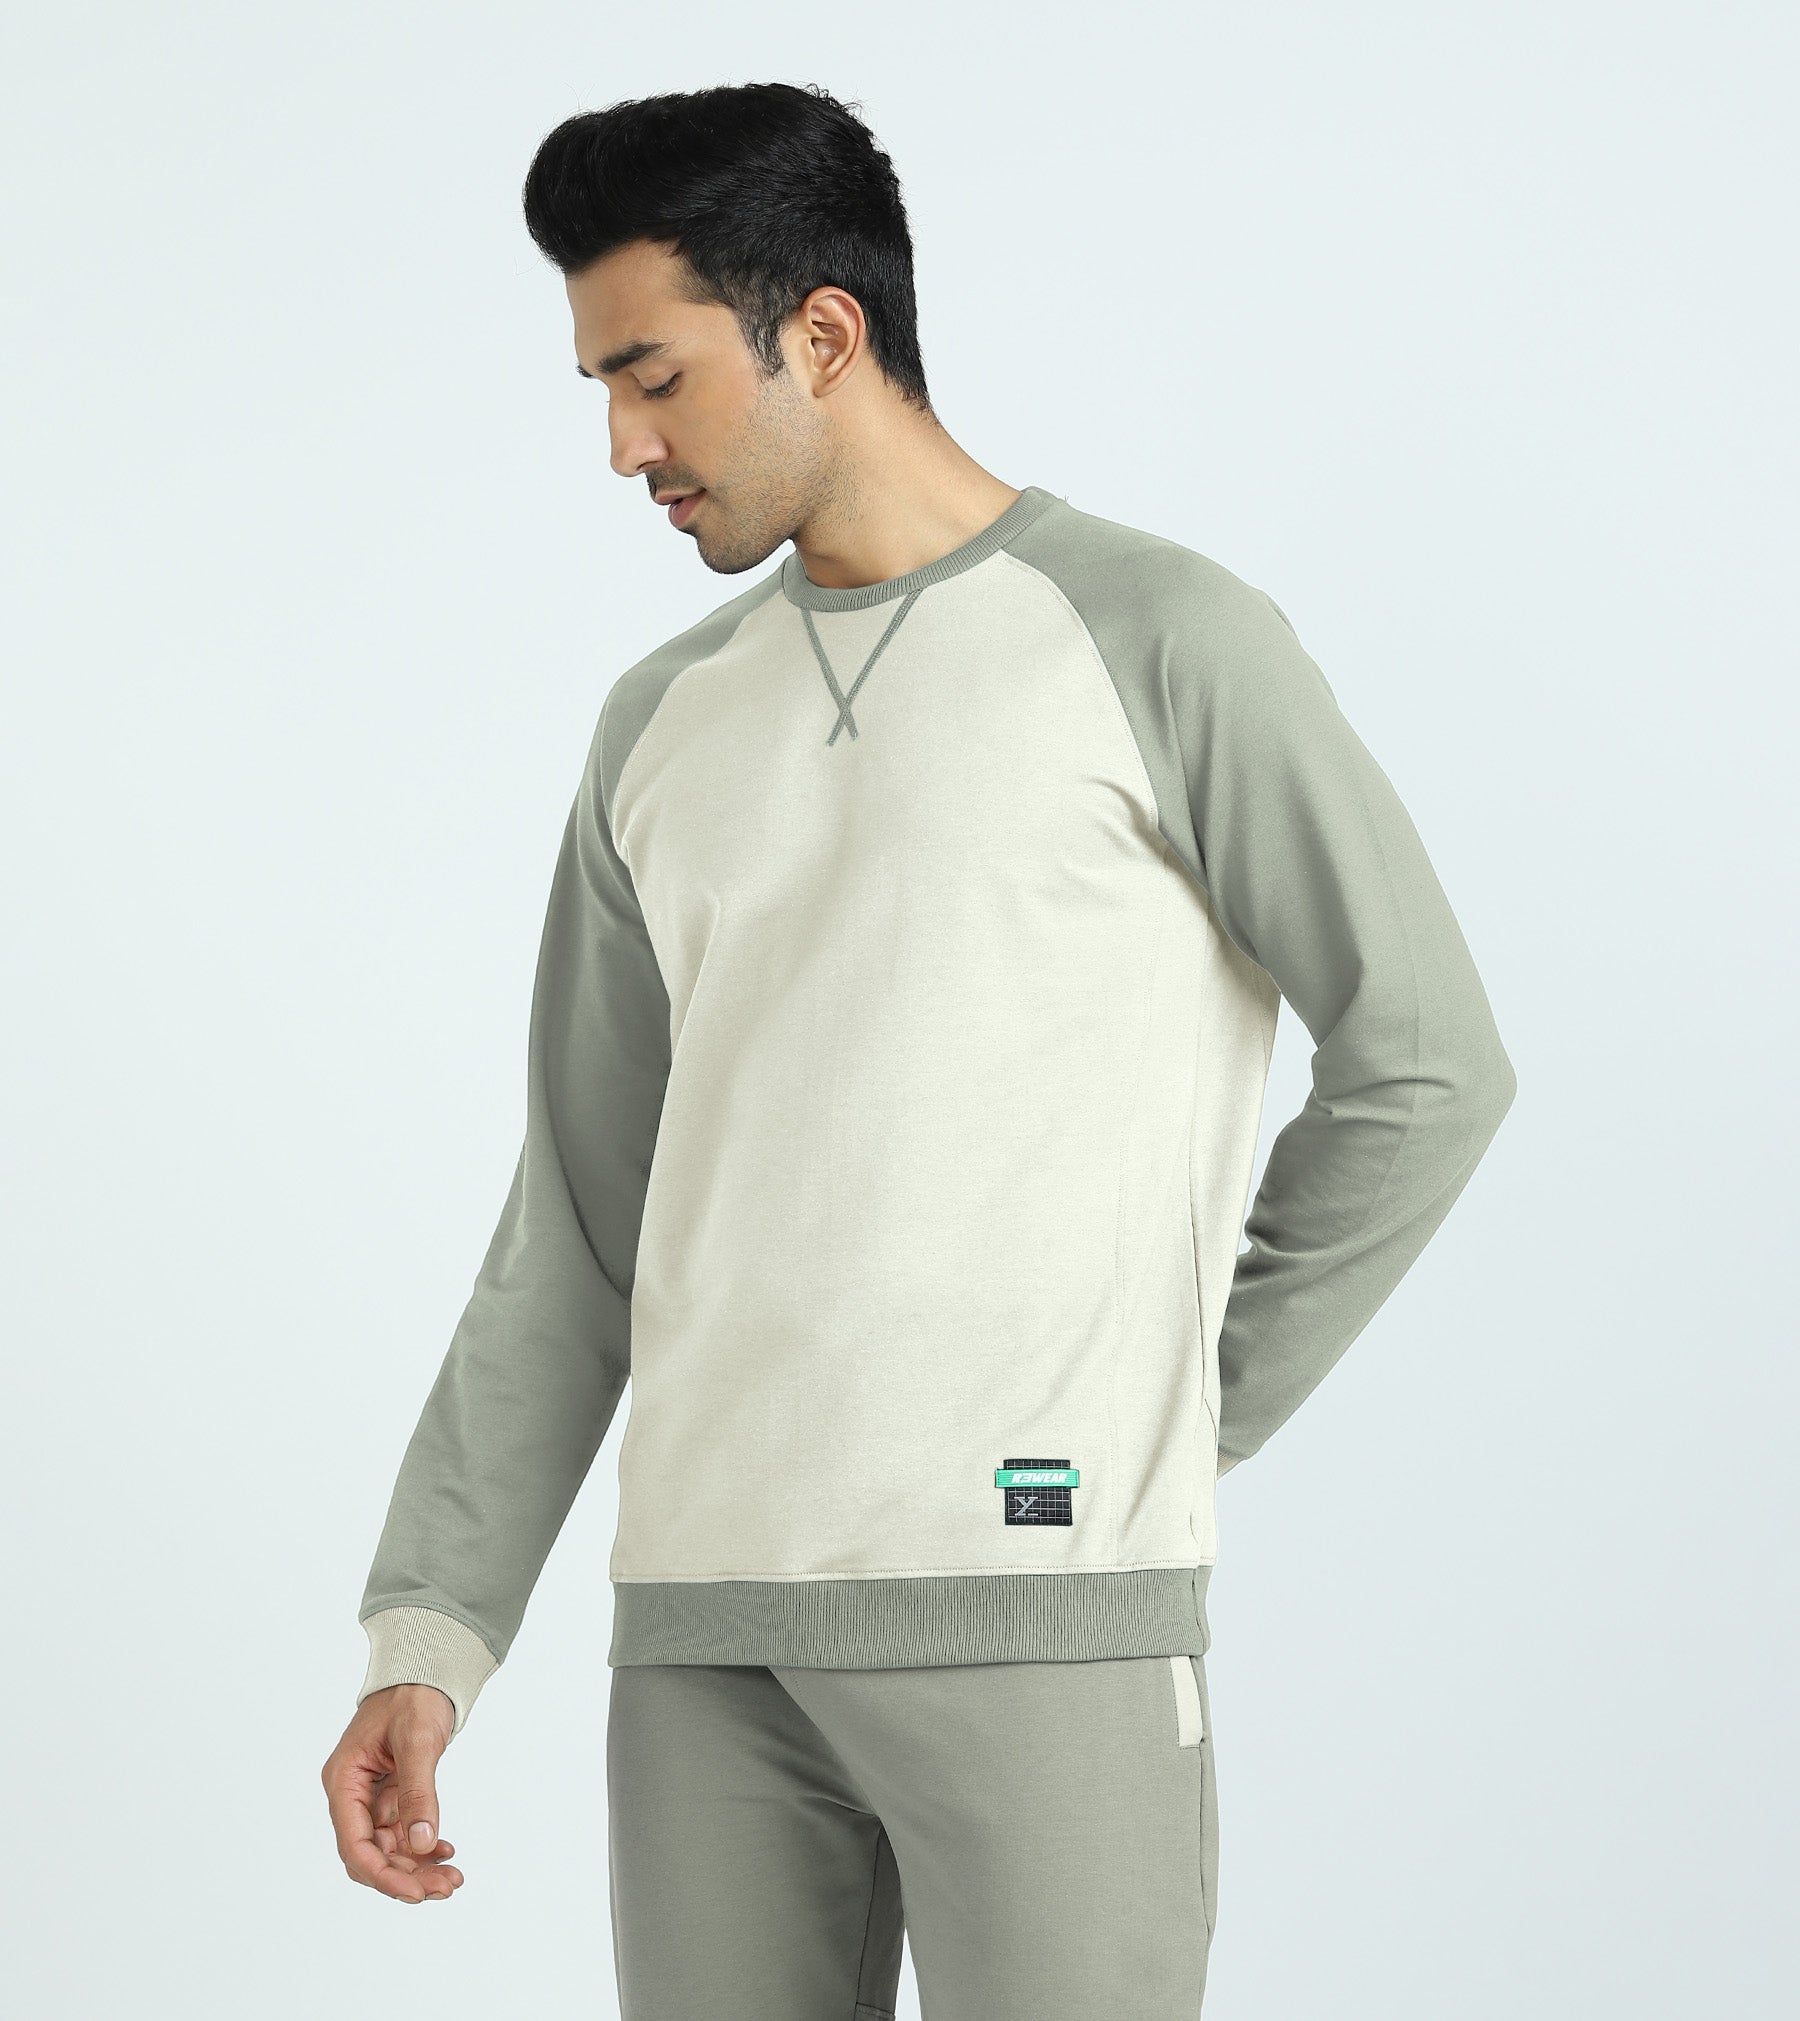 Quest French Terry Cotton-Blend Sweatshirt And Joggers Co-ord Set For Men Butter White - XYXX Mens Apparels